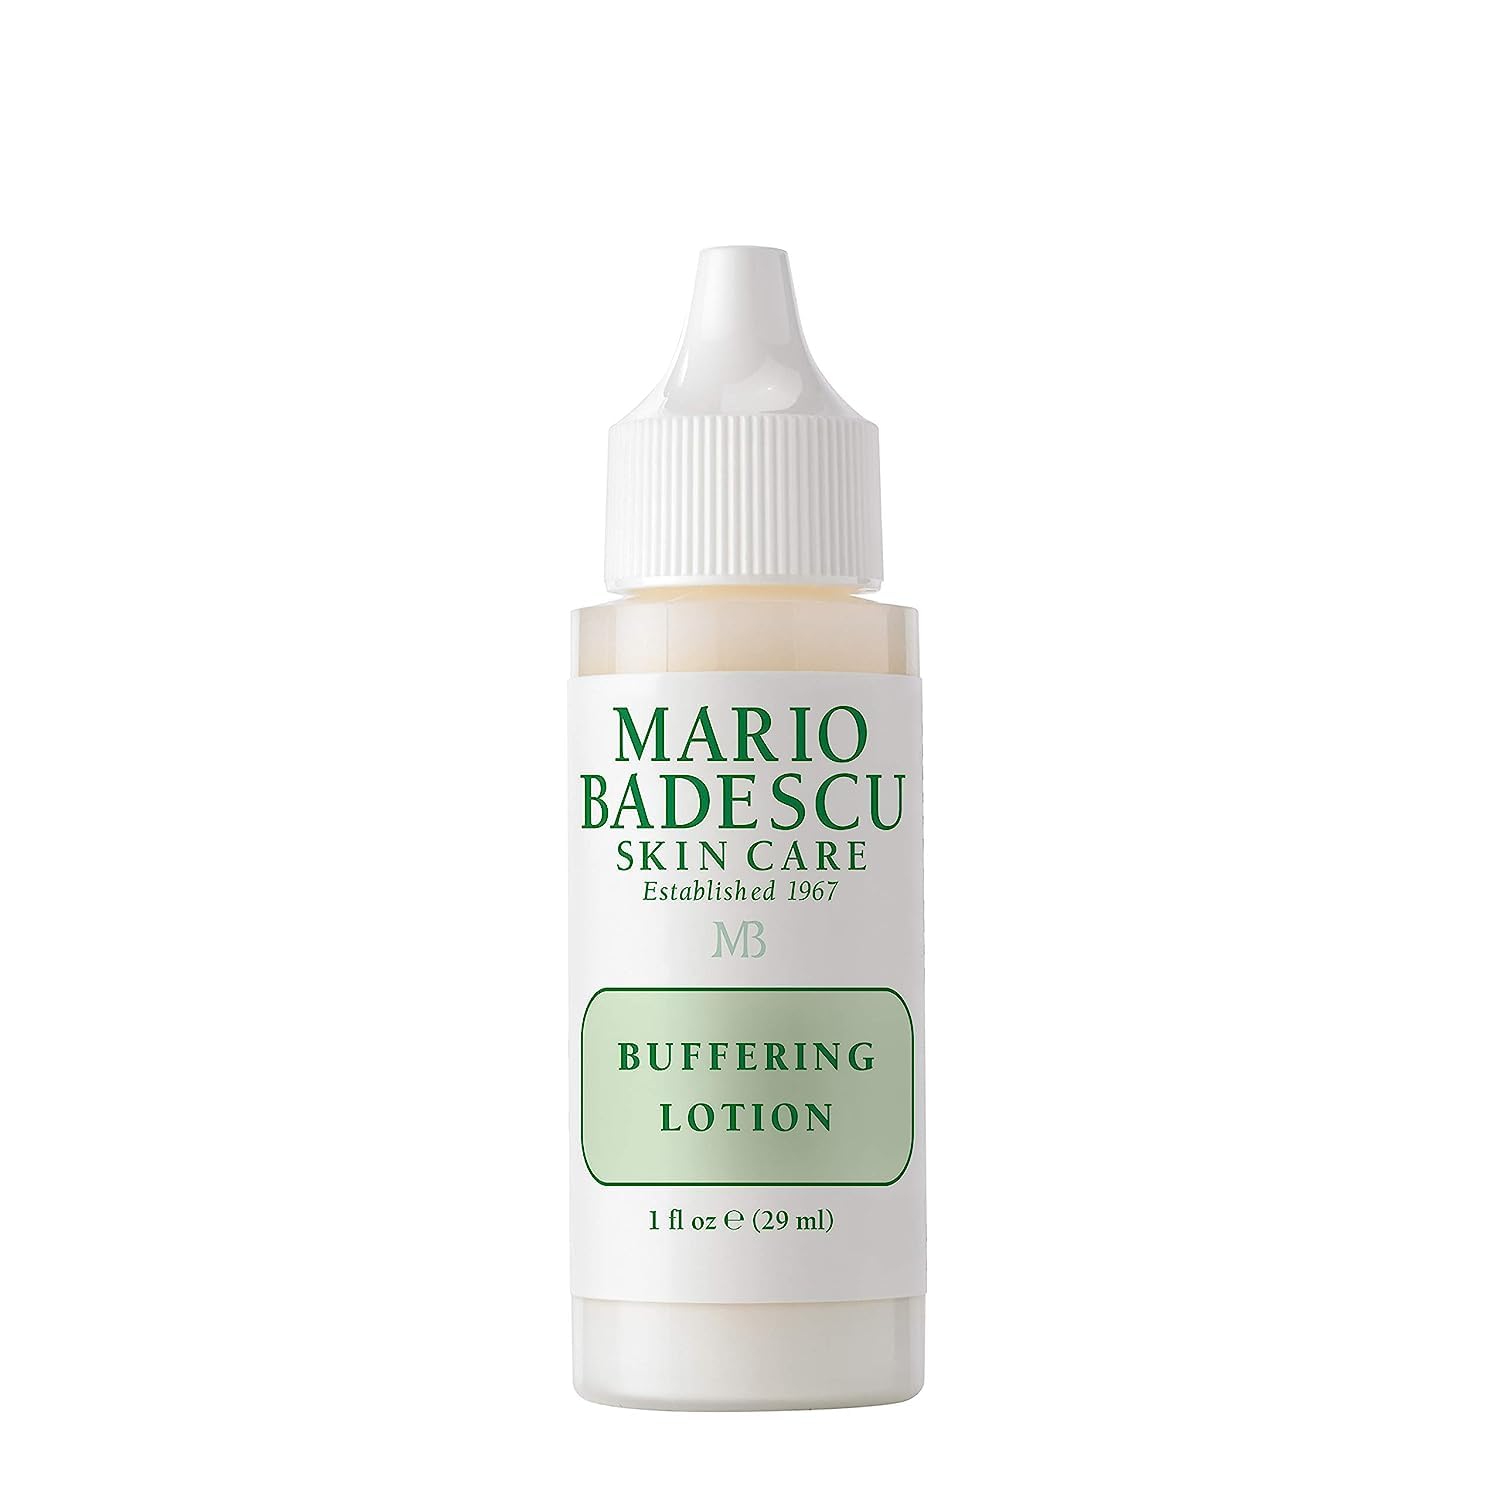 1-Oz Mario Badescu Buffering Lotion Blemish Spot Treatment for Cystic Acne $8.55 w/ S&S + Free Shipping w/ Prime or on $35+